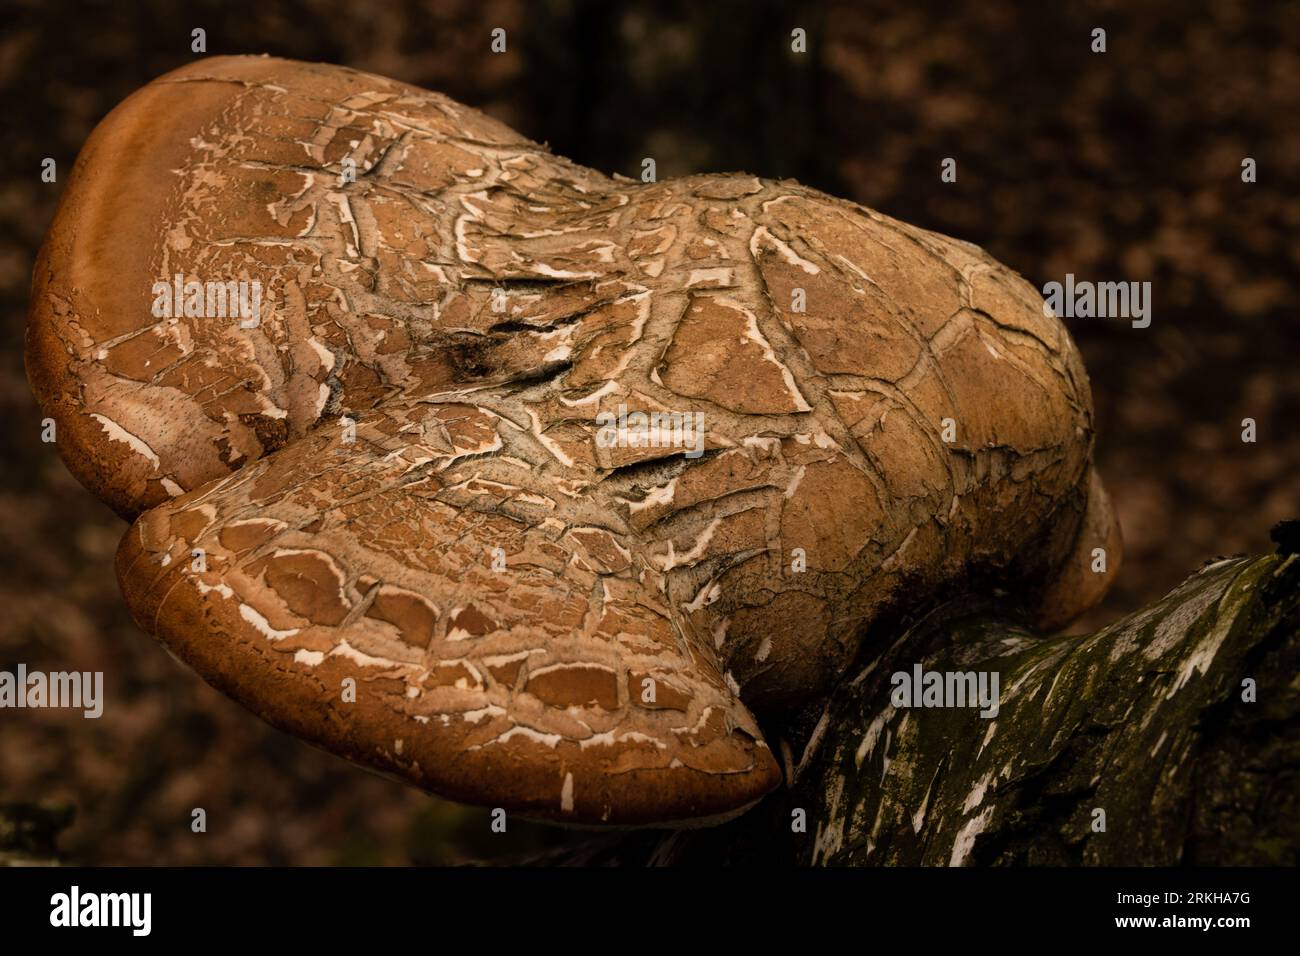 A close-up of a large, brown Birch Polypore mushroom with its dry, fan-like texture Stock Photo